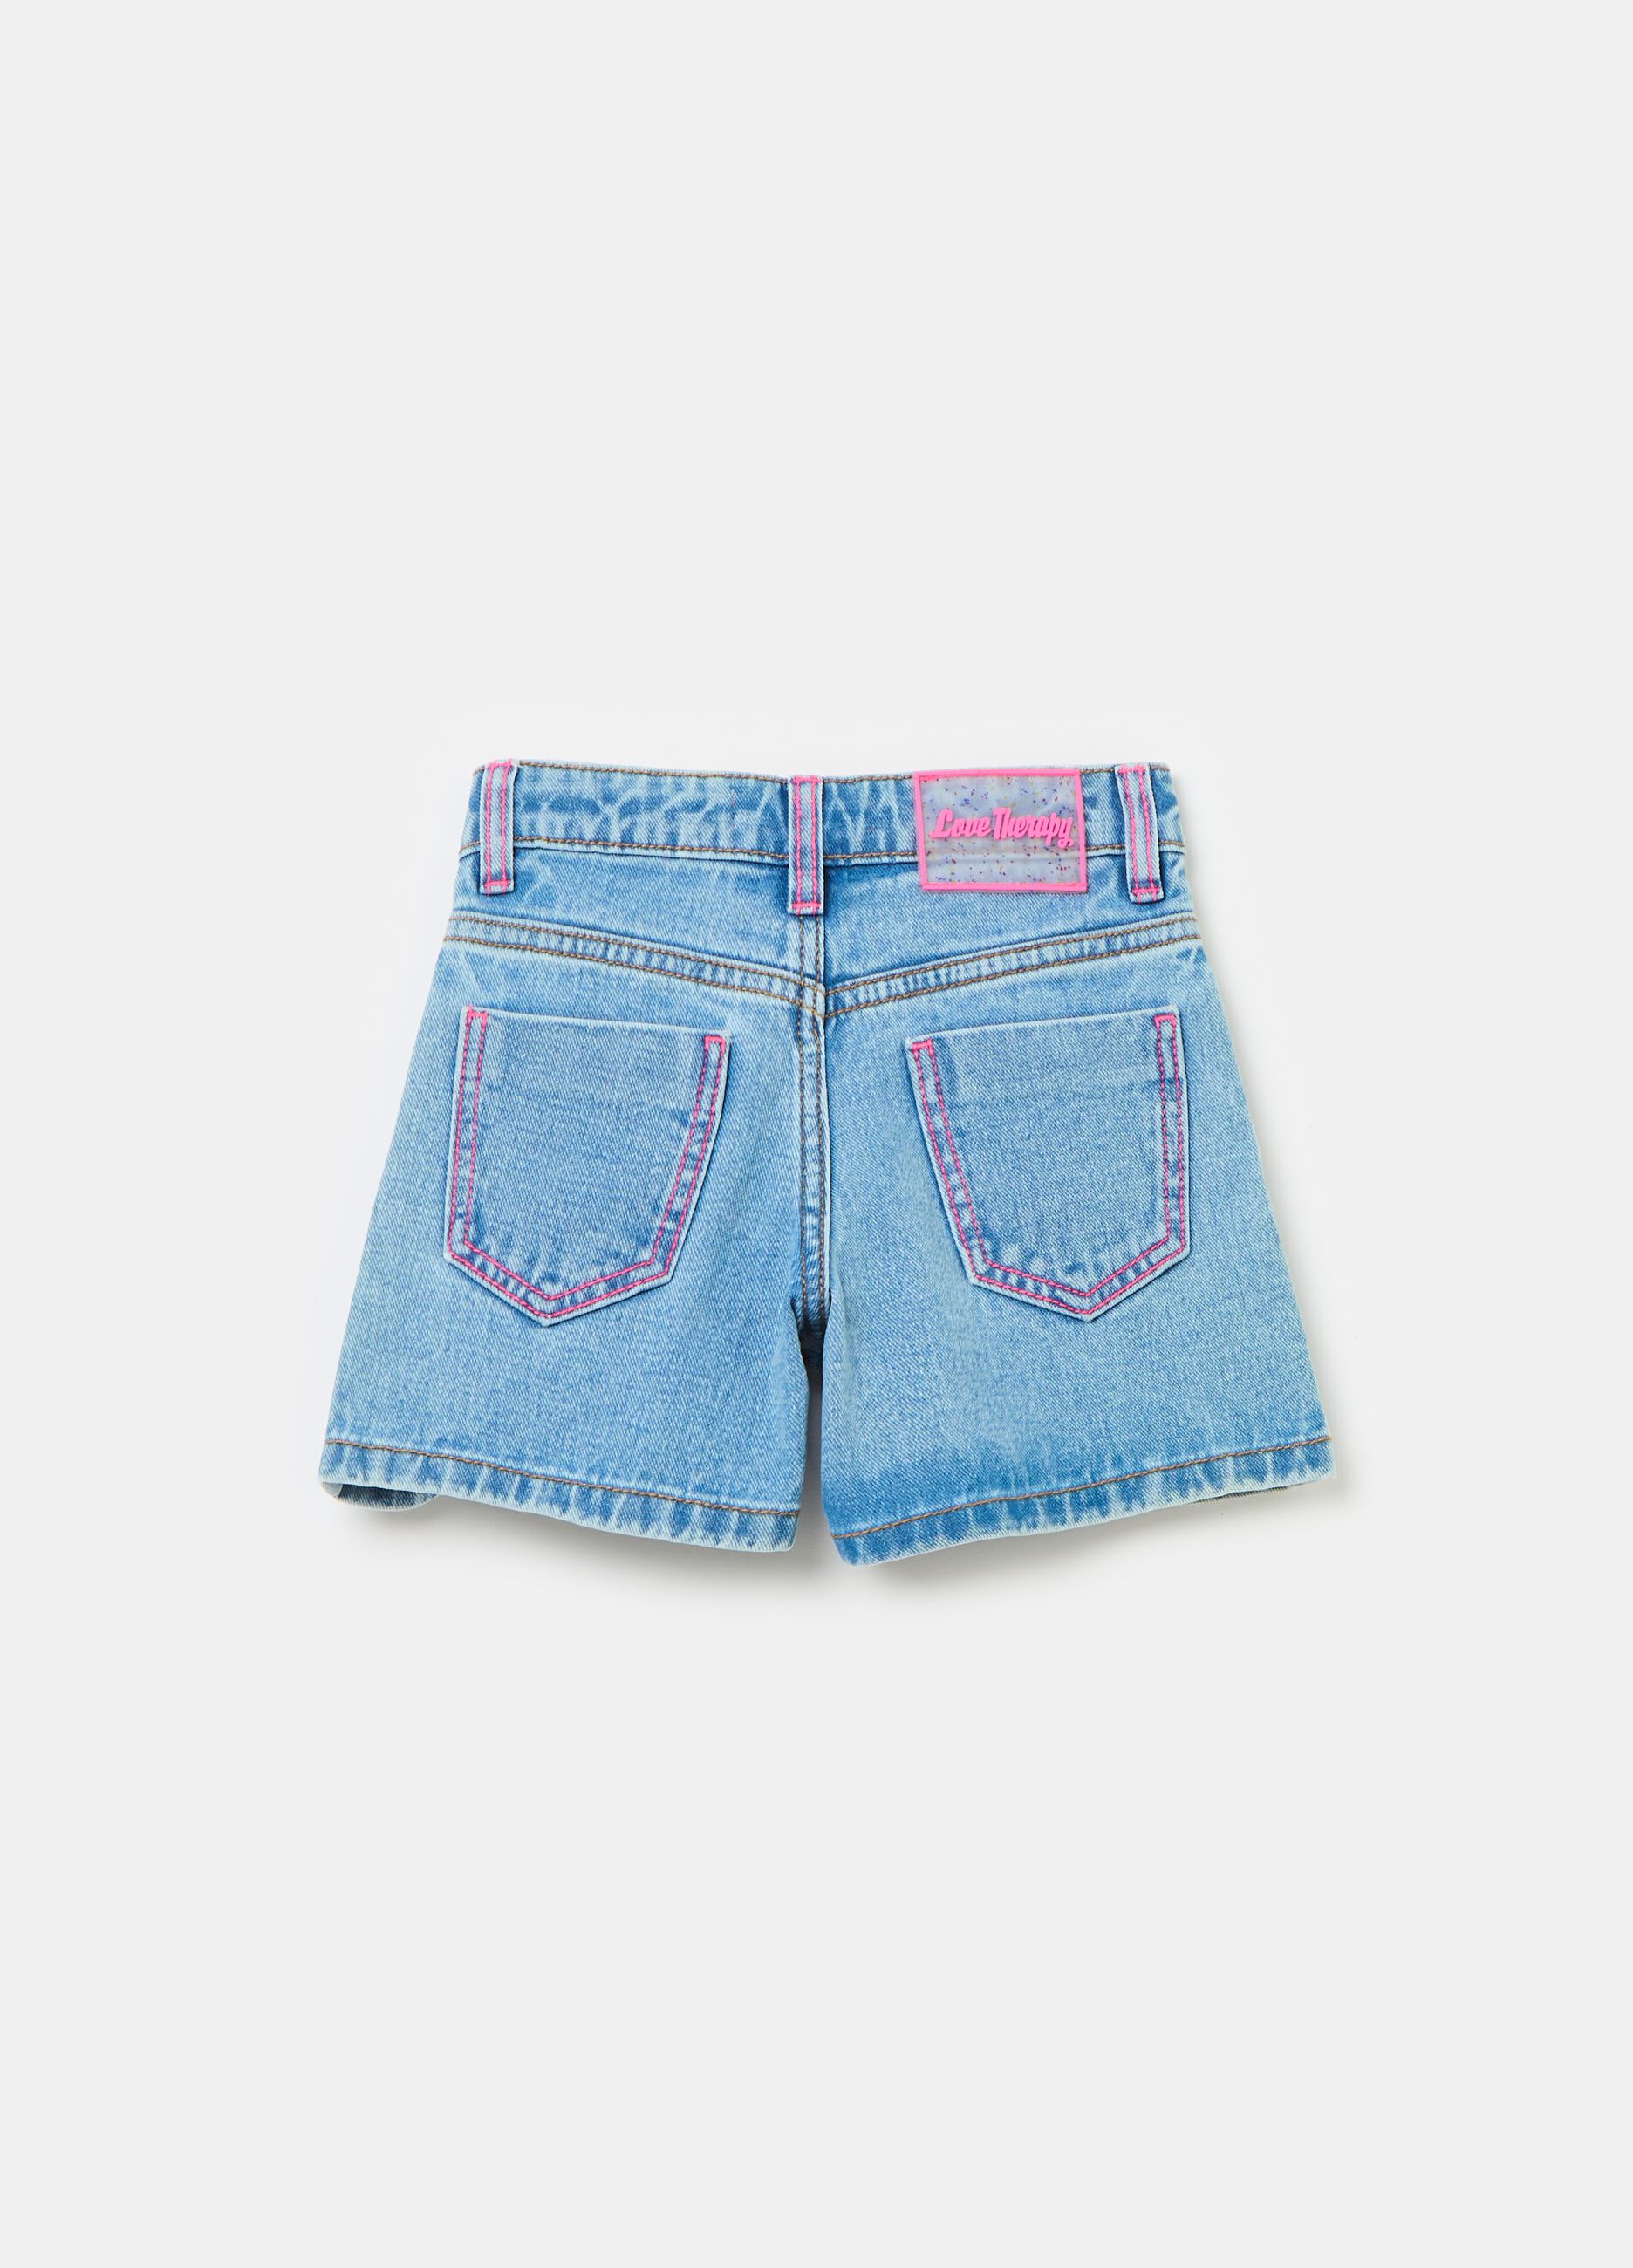 Denim shorts with five pockets and embroidery